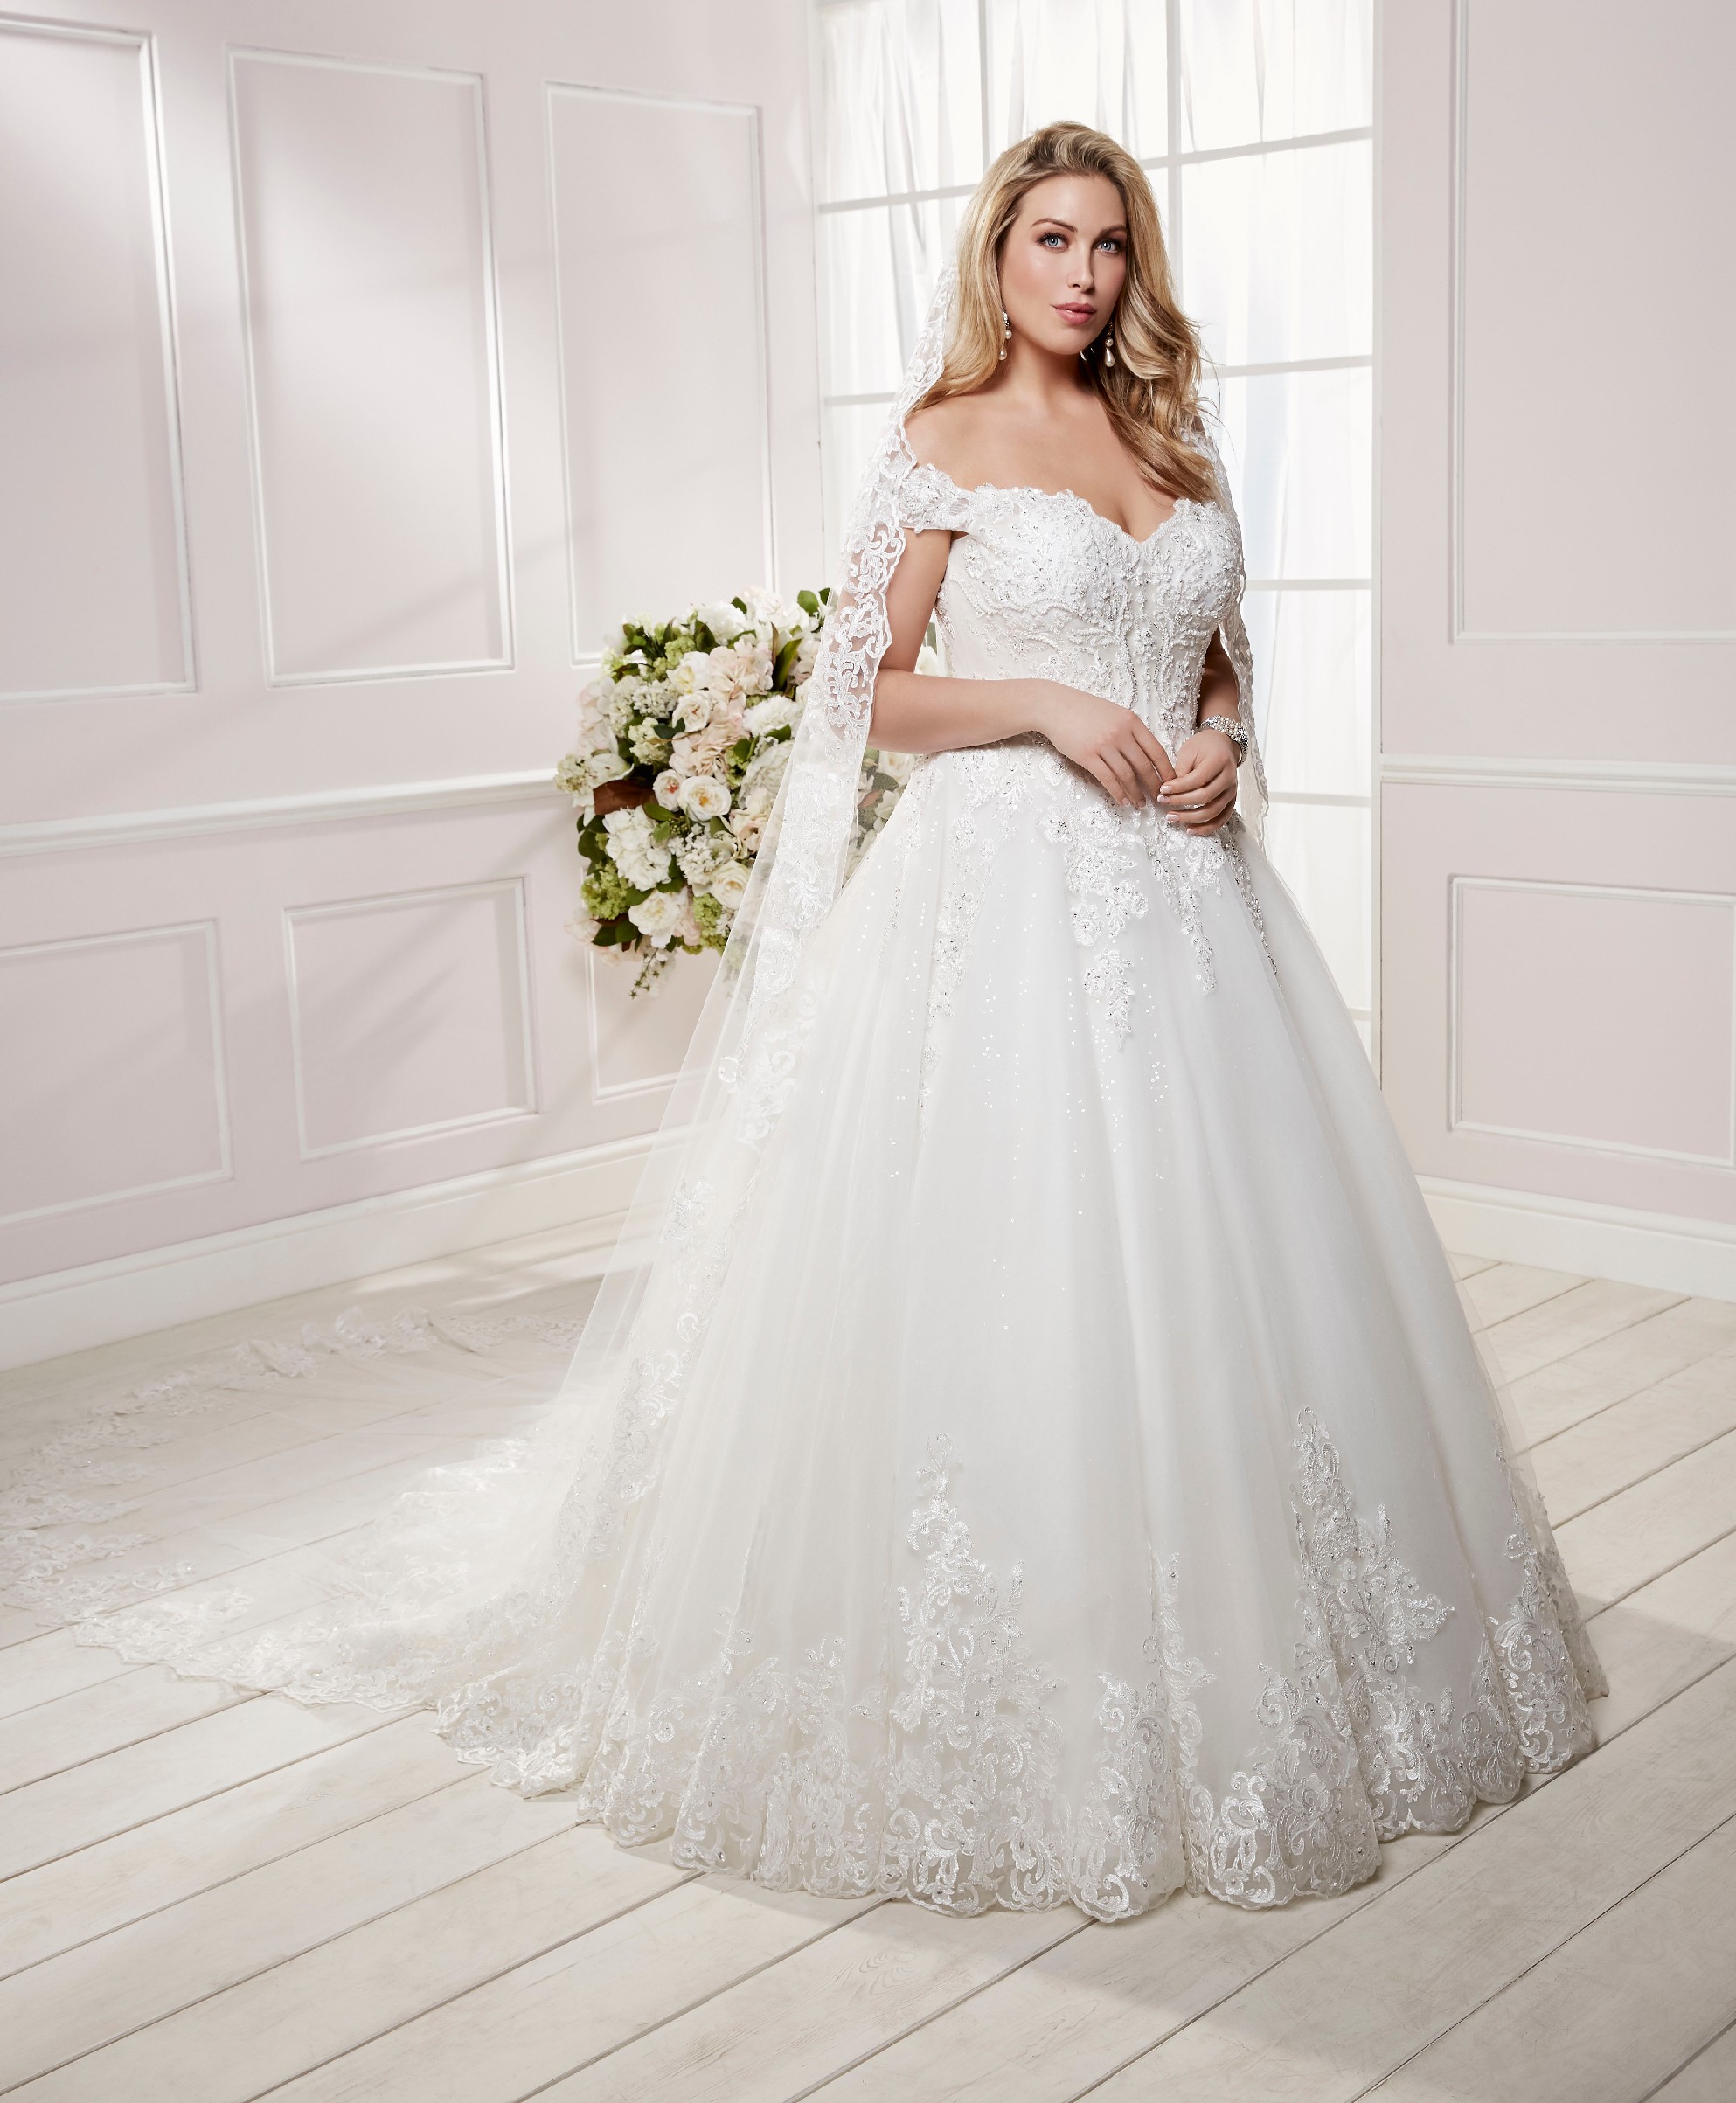 Curvy model in Ronald Joyce plus size wedding dress style 69479, an ivory tulle ballgown dress with detachable off-the-shoulder cap sleeves and lace appliques  